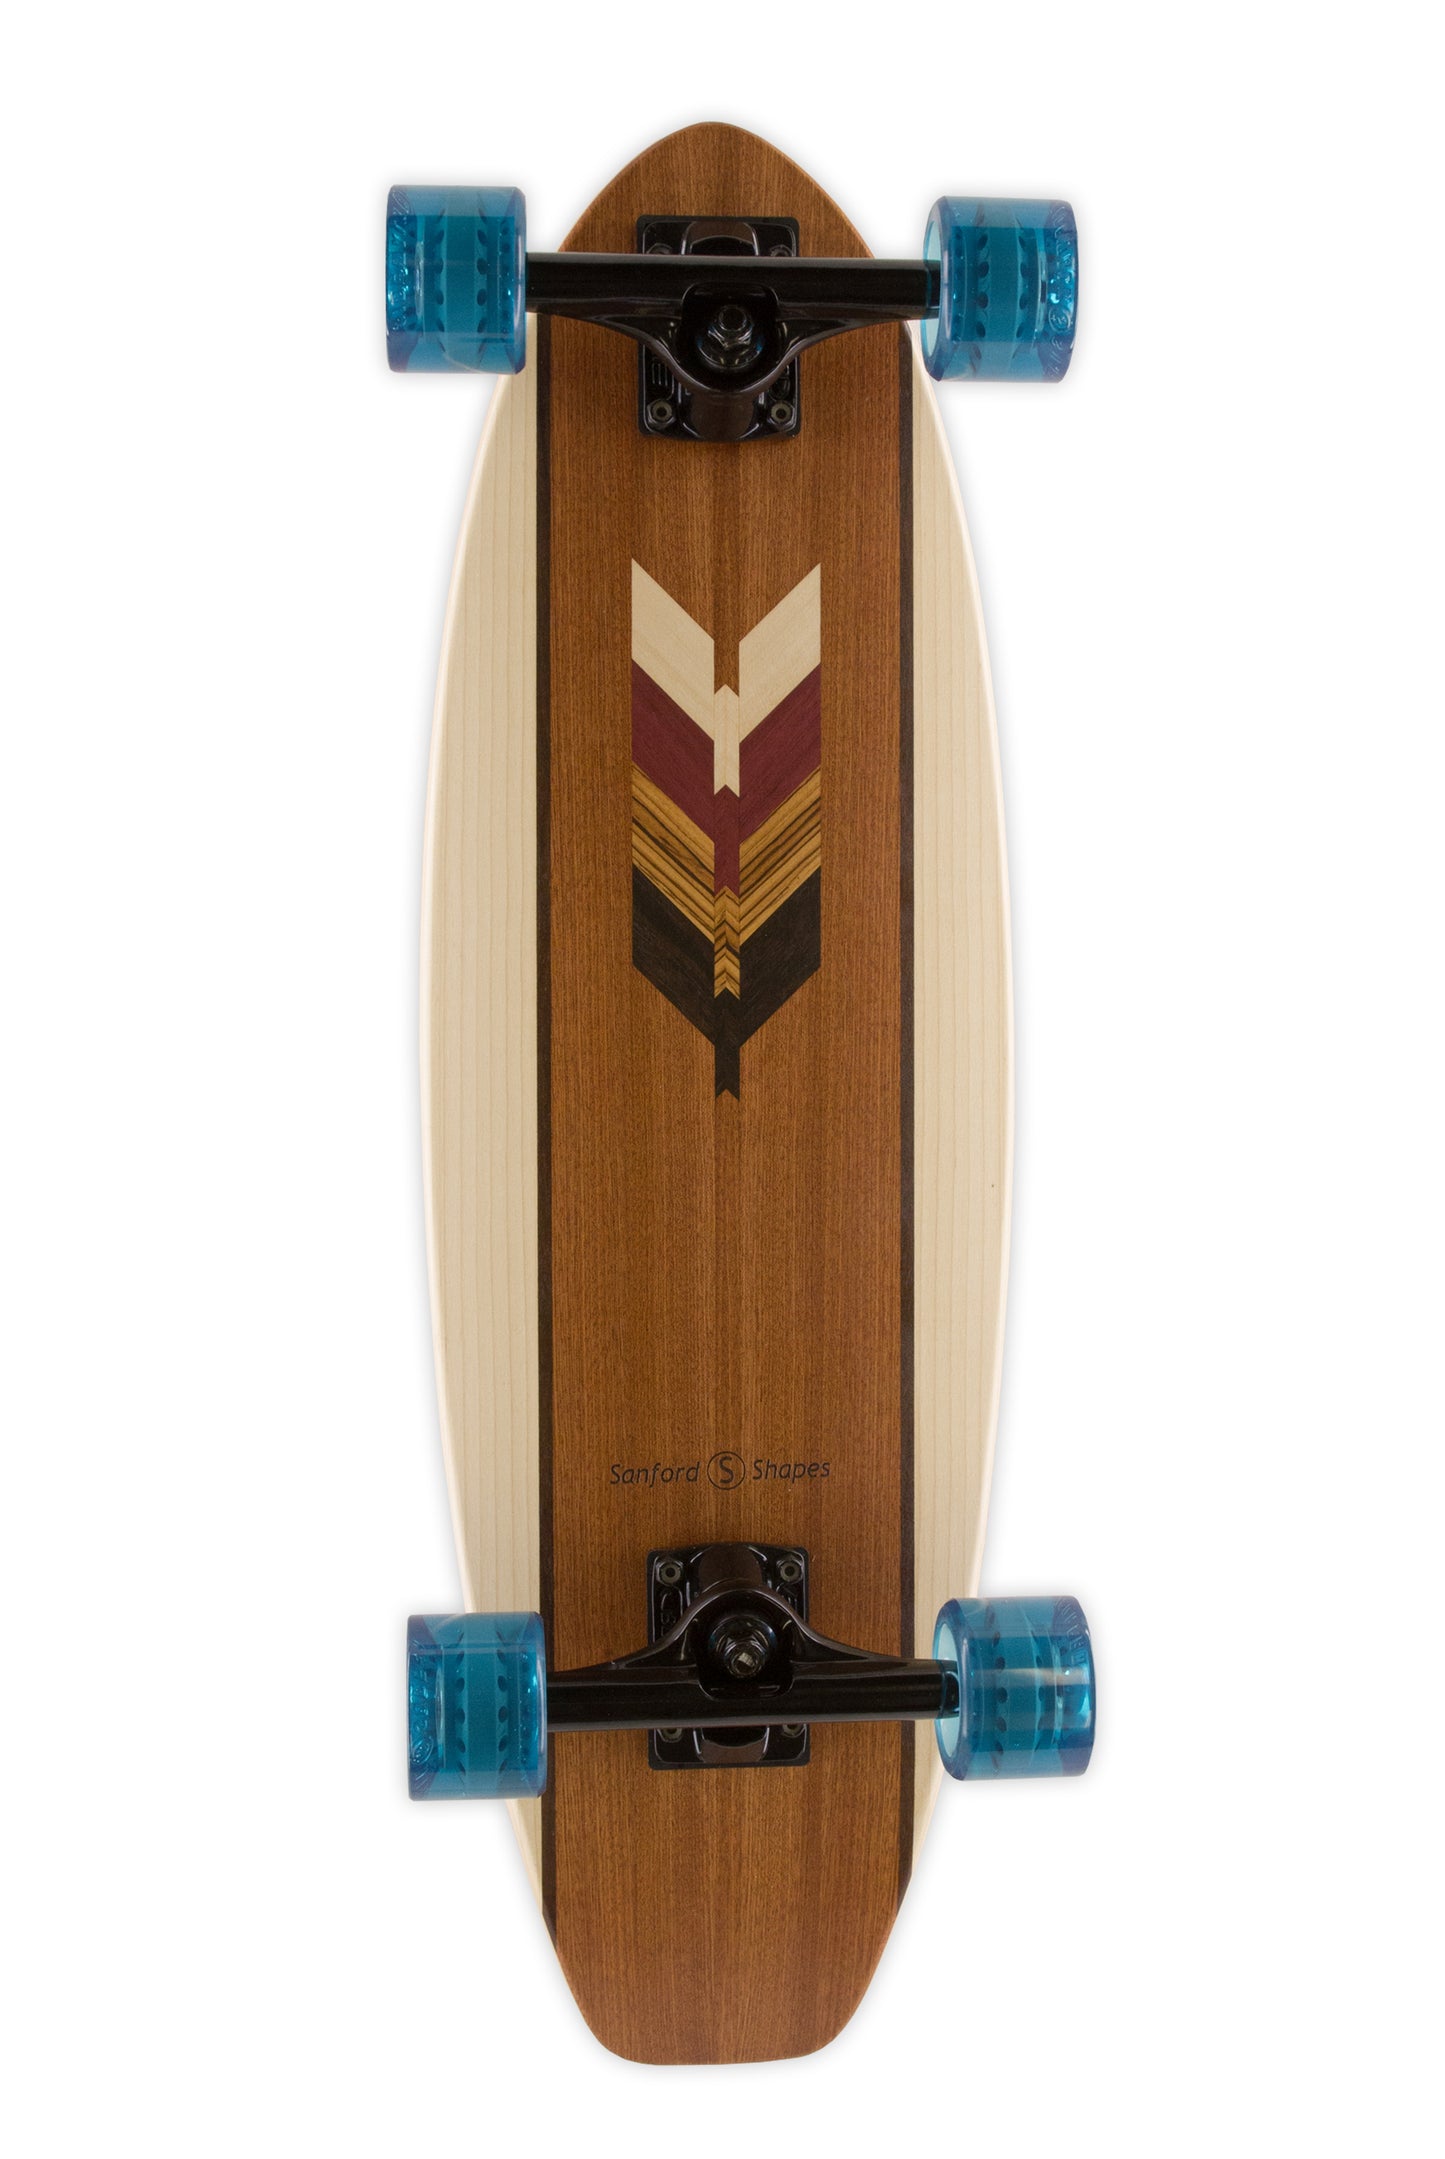 FREEDOM SMALL COMPLETE SKATEBOARD 27.5"